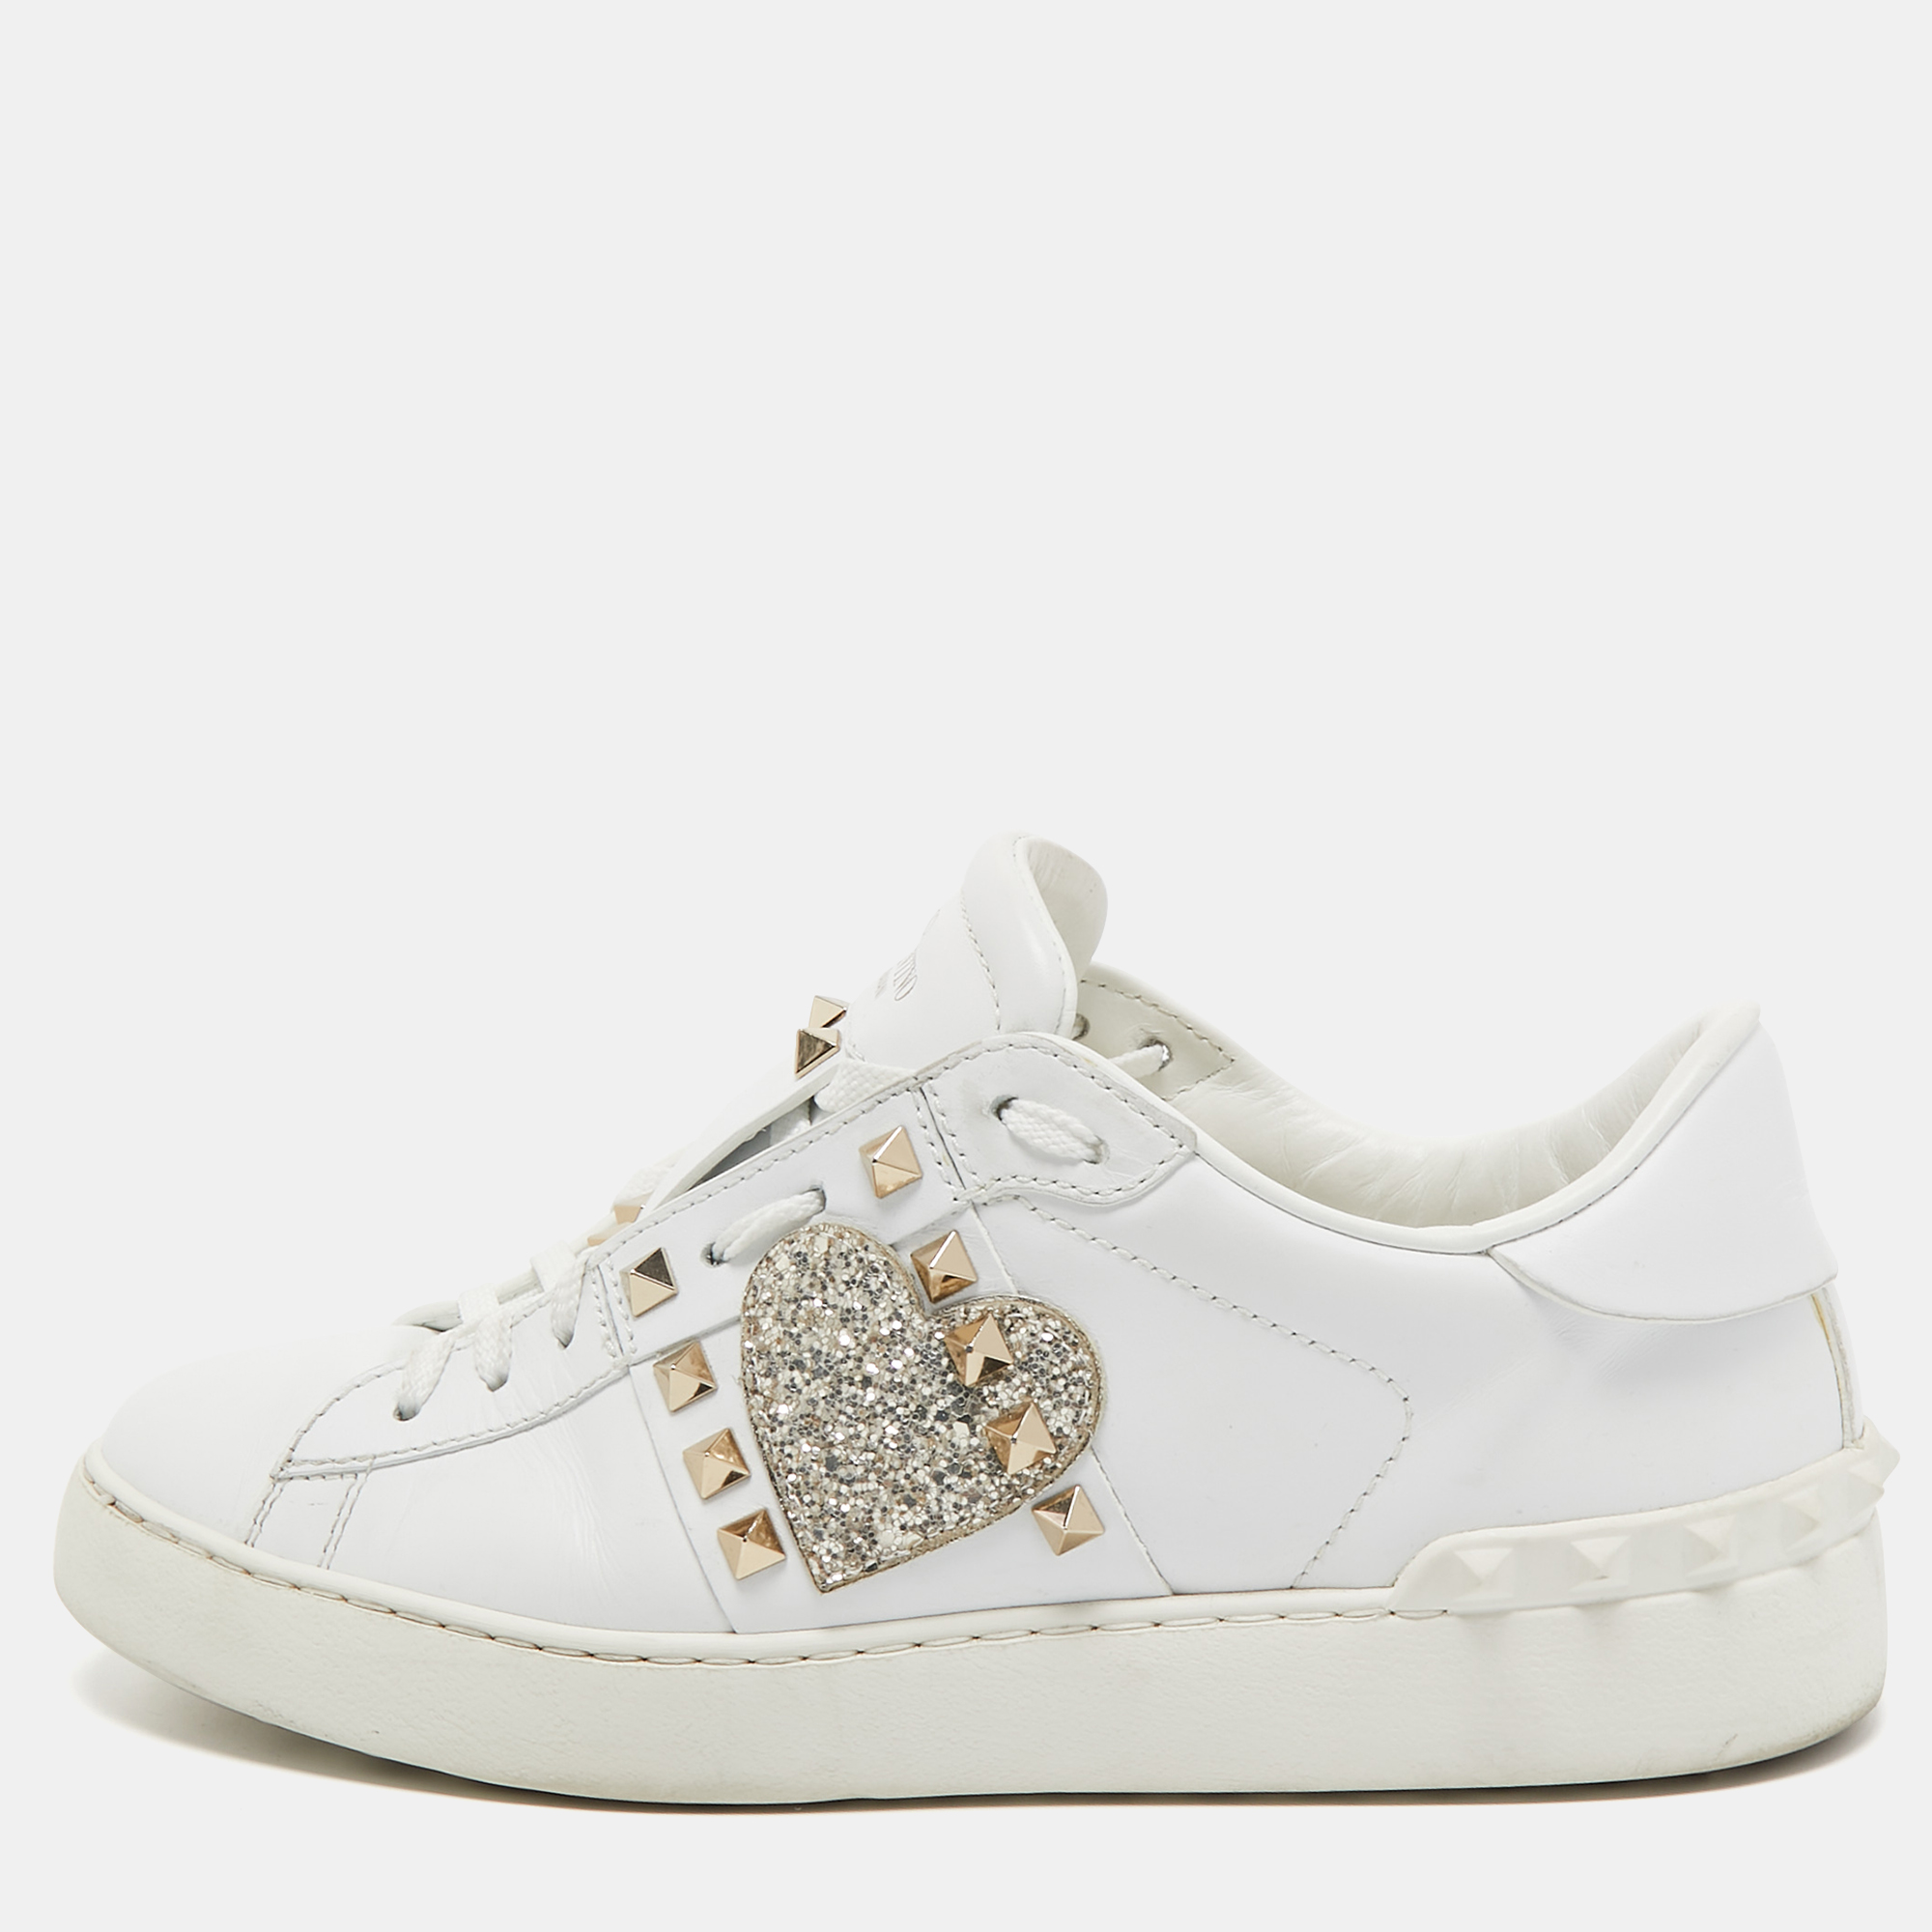 Valentino White Leather Heart Applique Rockstud Low Top Sneakers Size 39